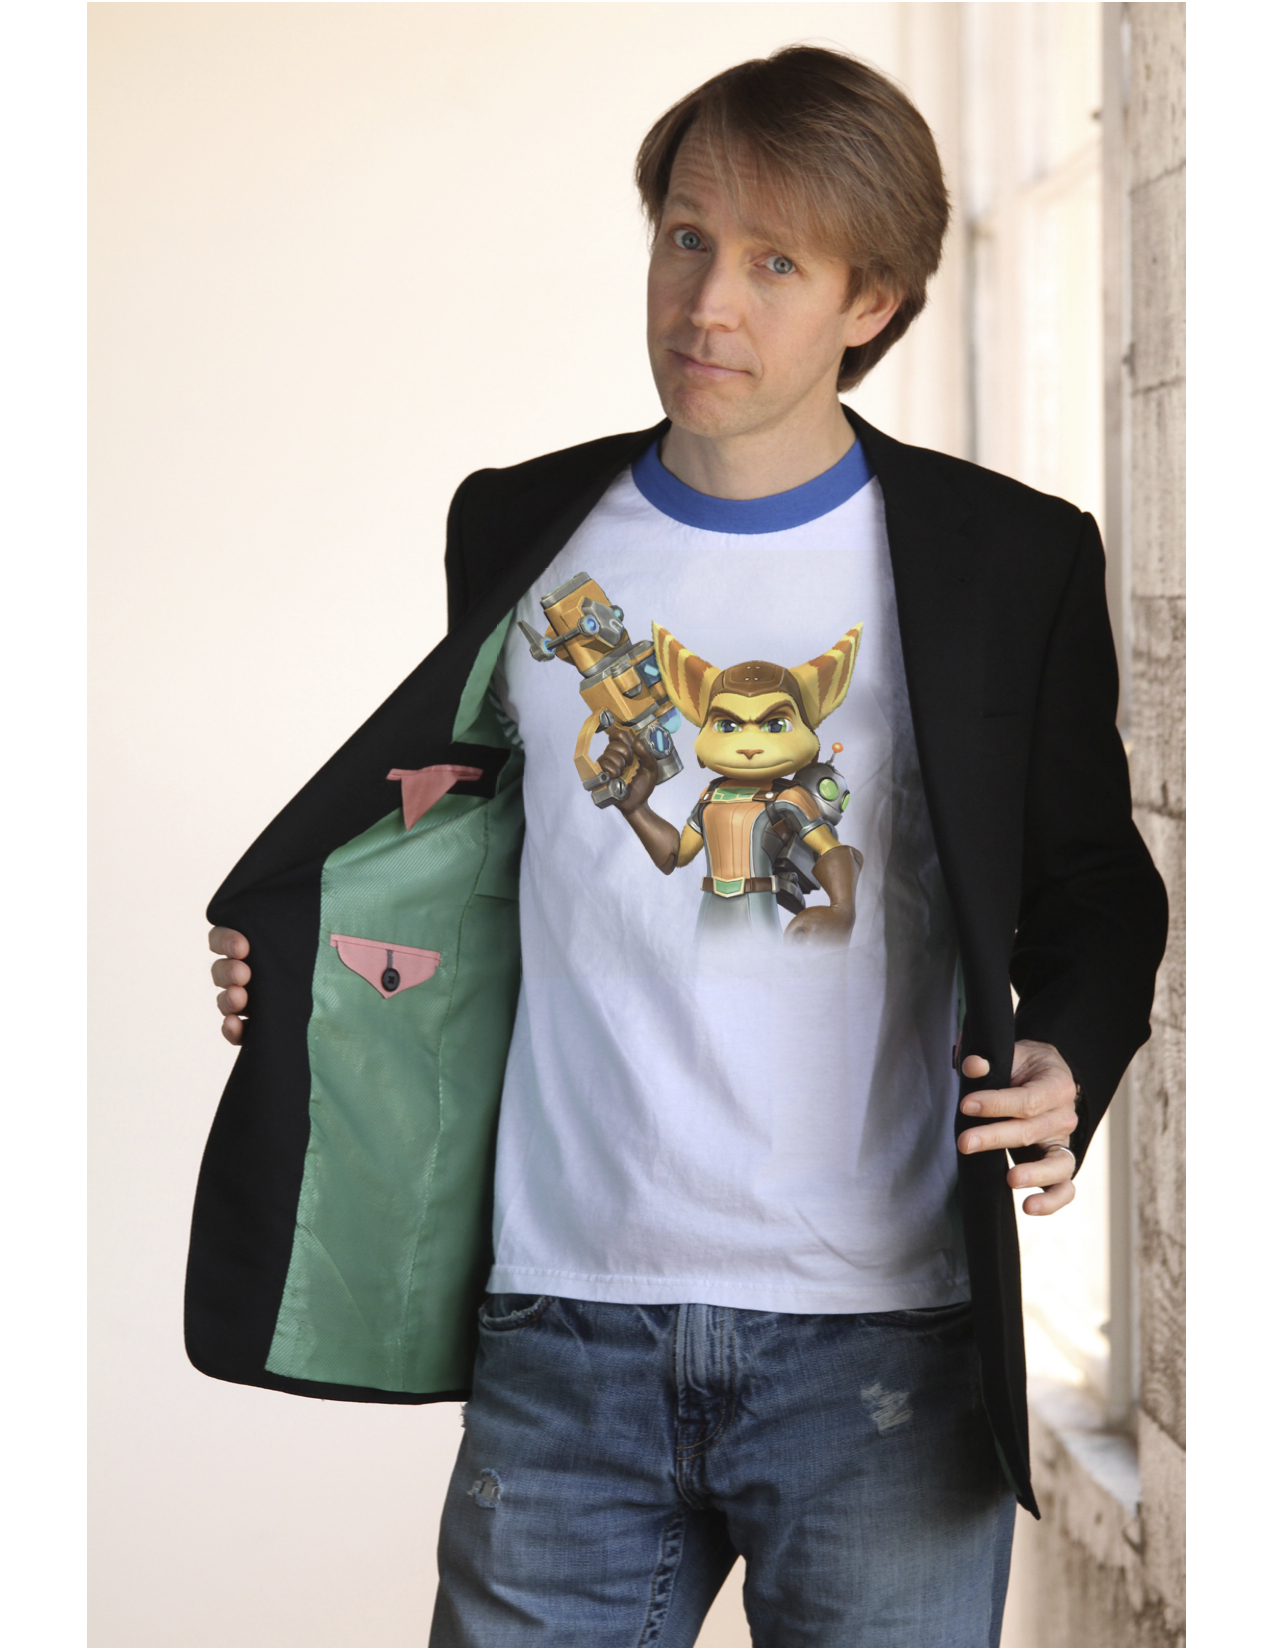 James Arnold Taylor is the voice of Ratchet from Ratchet and Clank